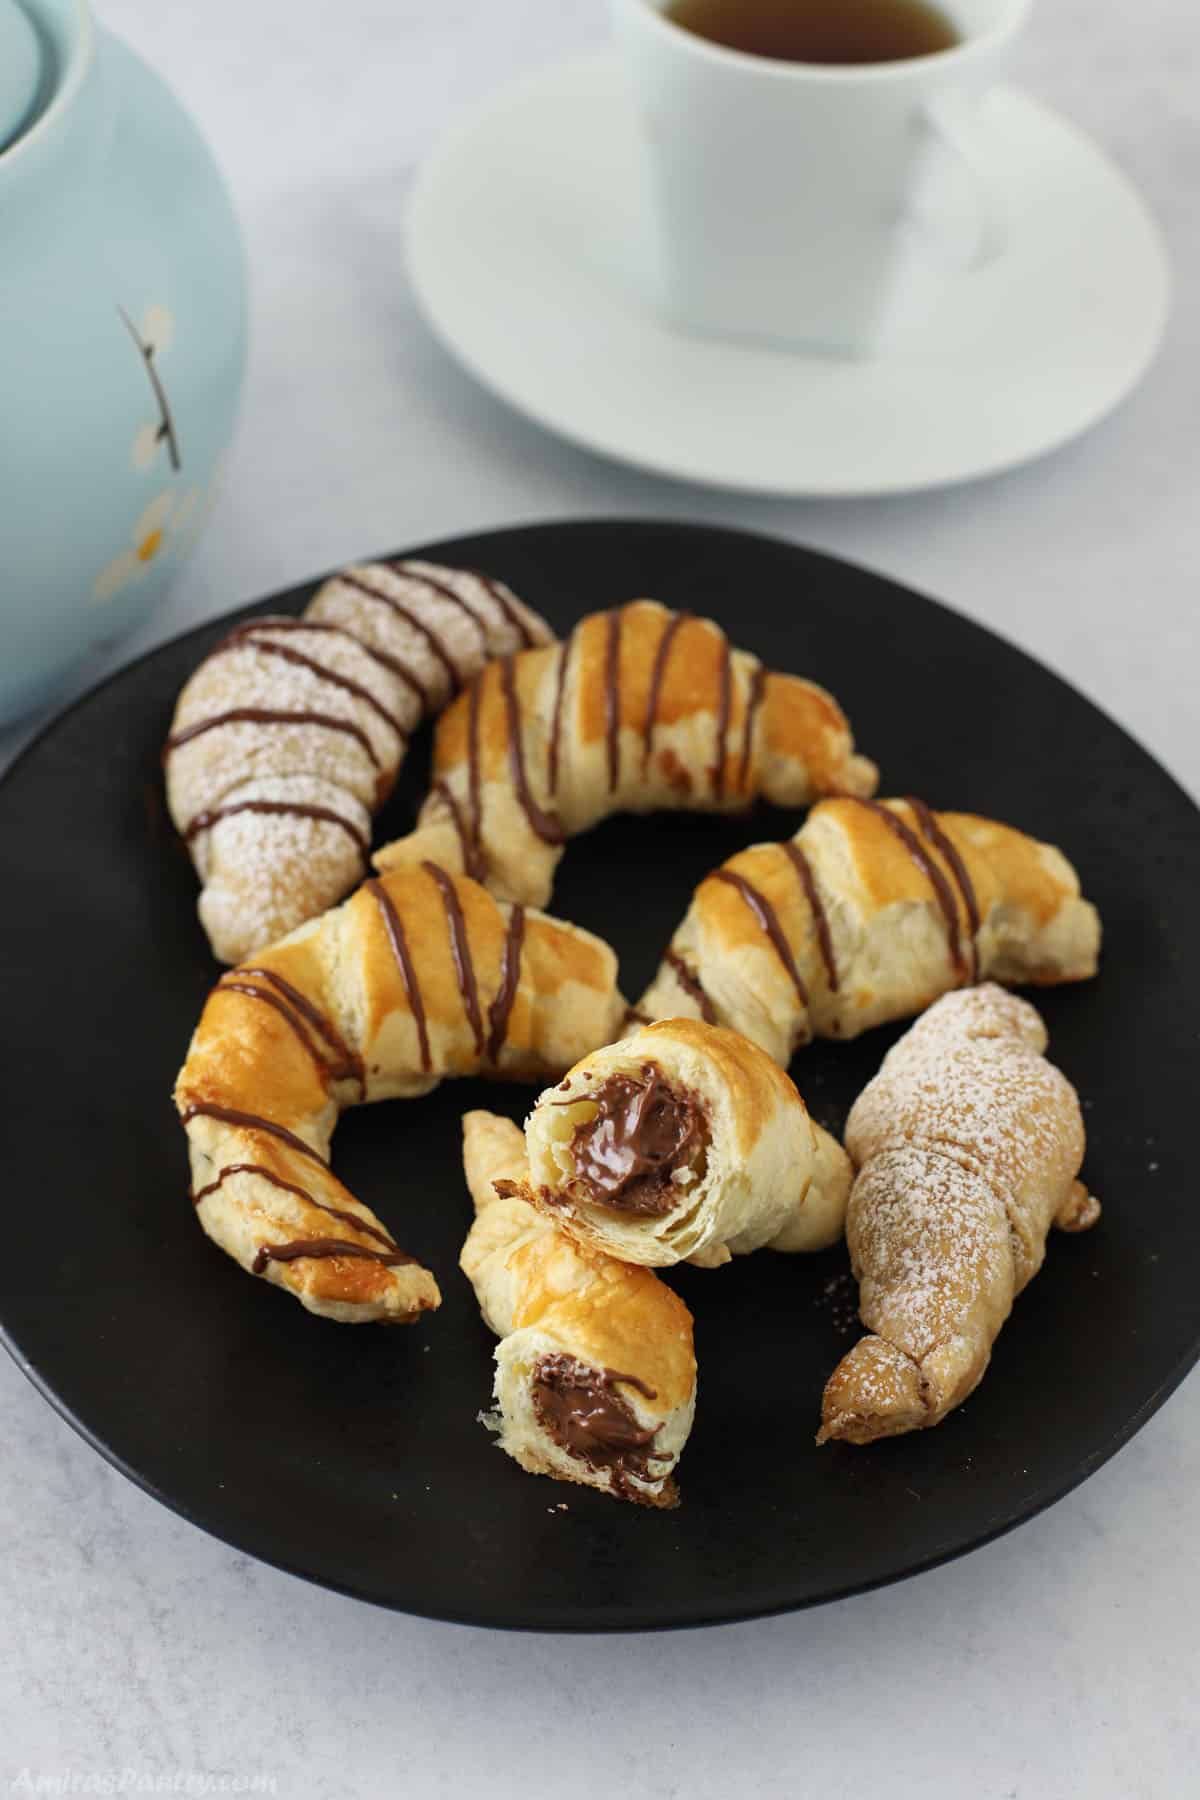 Chocolate croissants on a black serving plate with one cut in half to show melted chocolate.